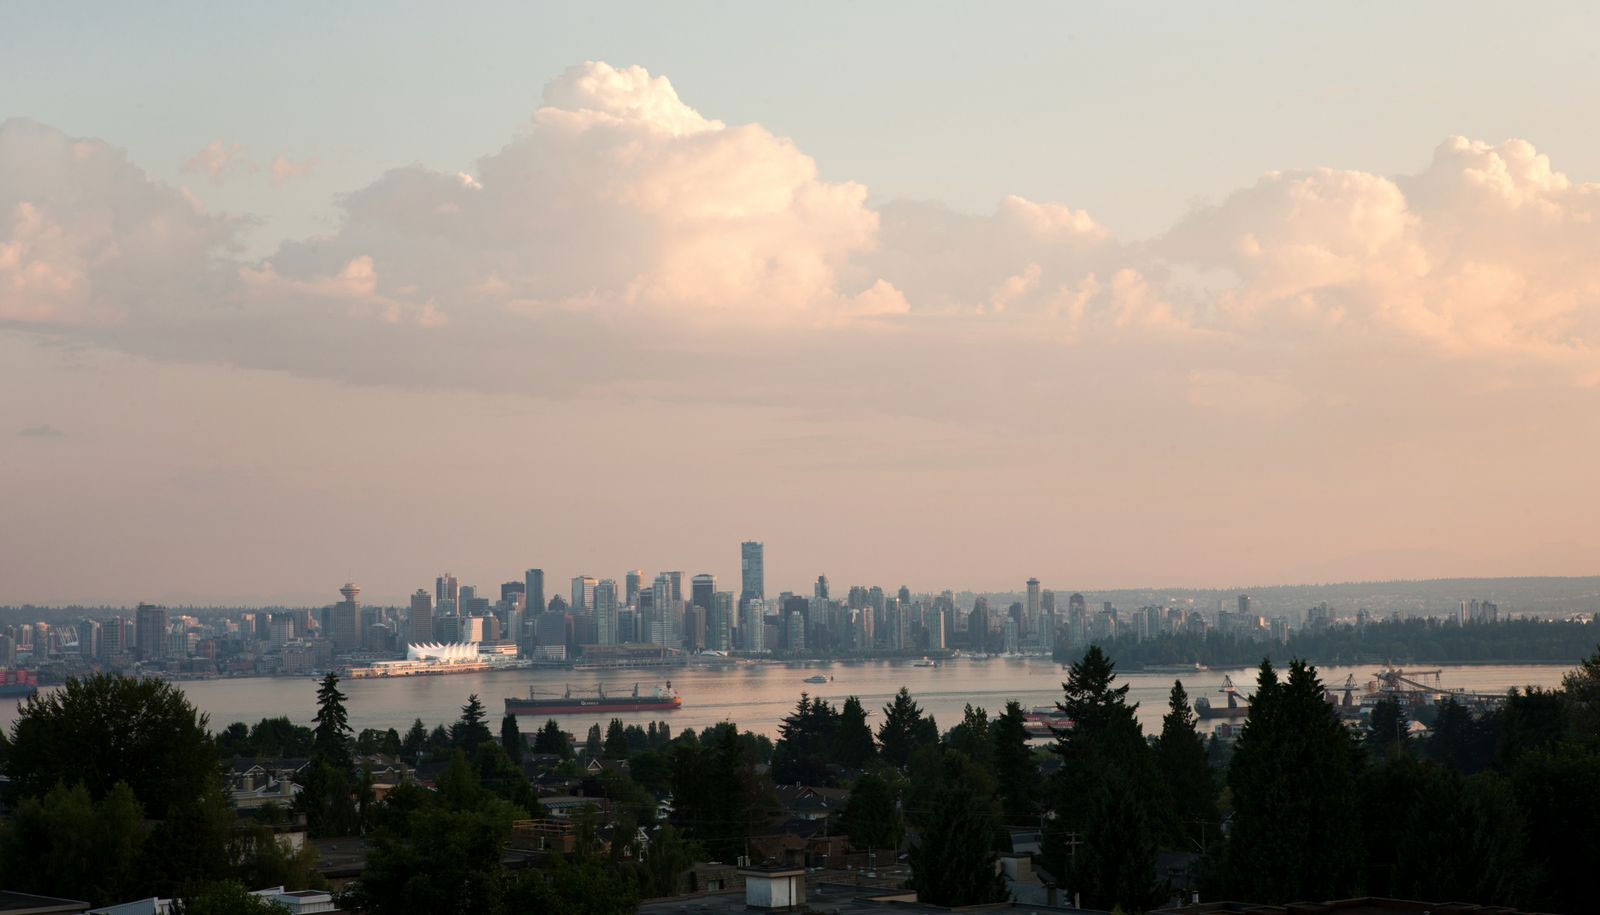 The View on Lonsdale | Seeing is believing.